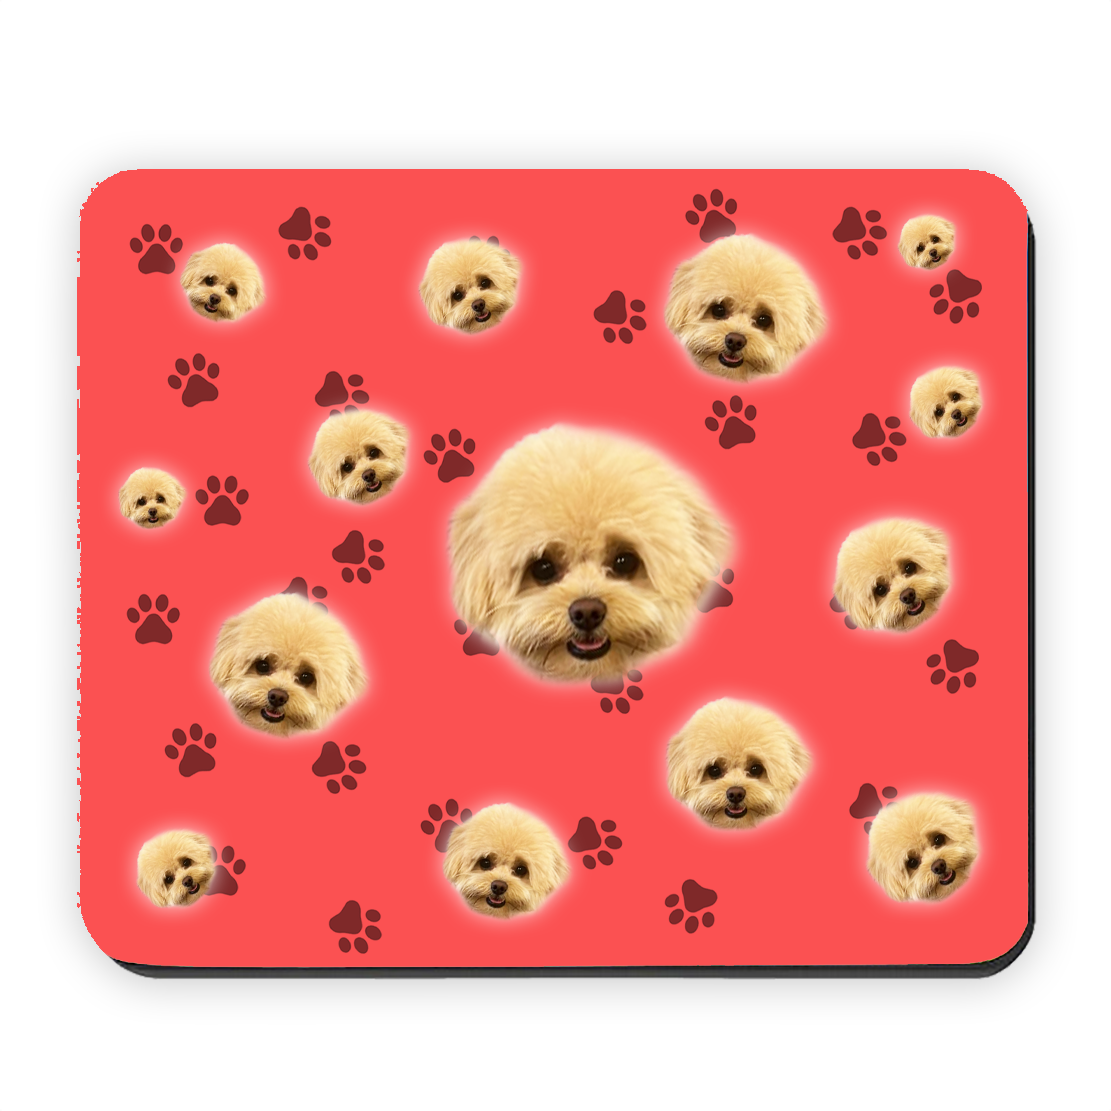 My dog on a Mouse Pad